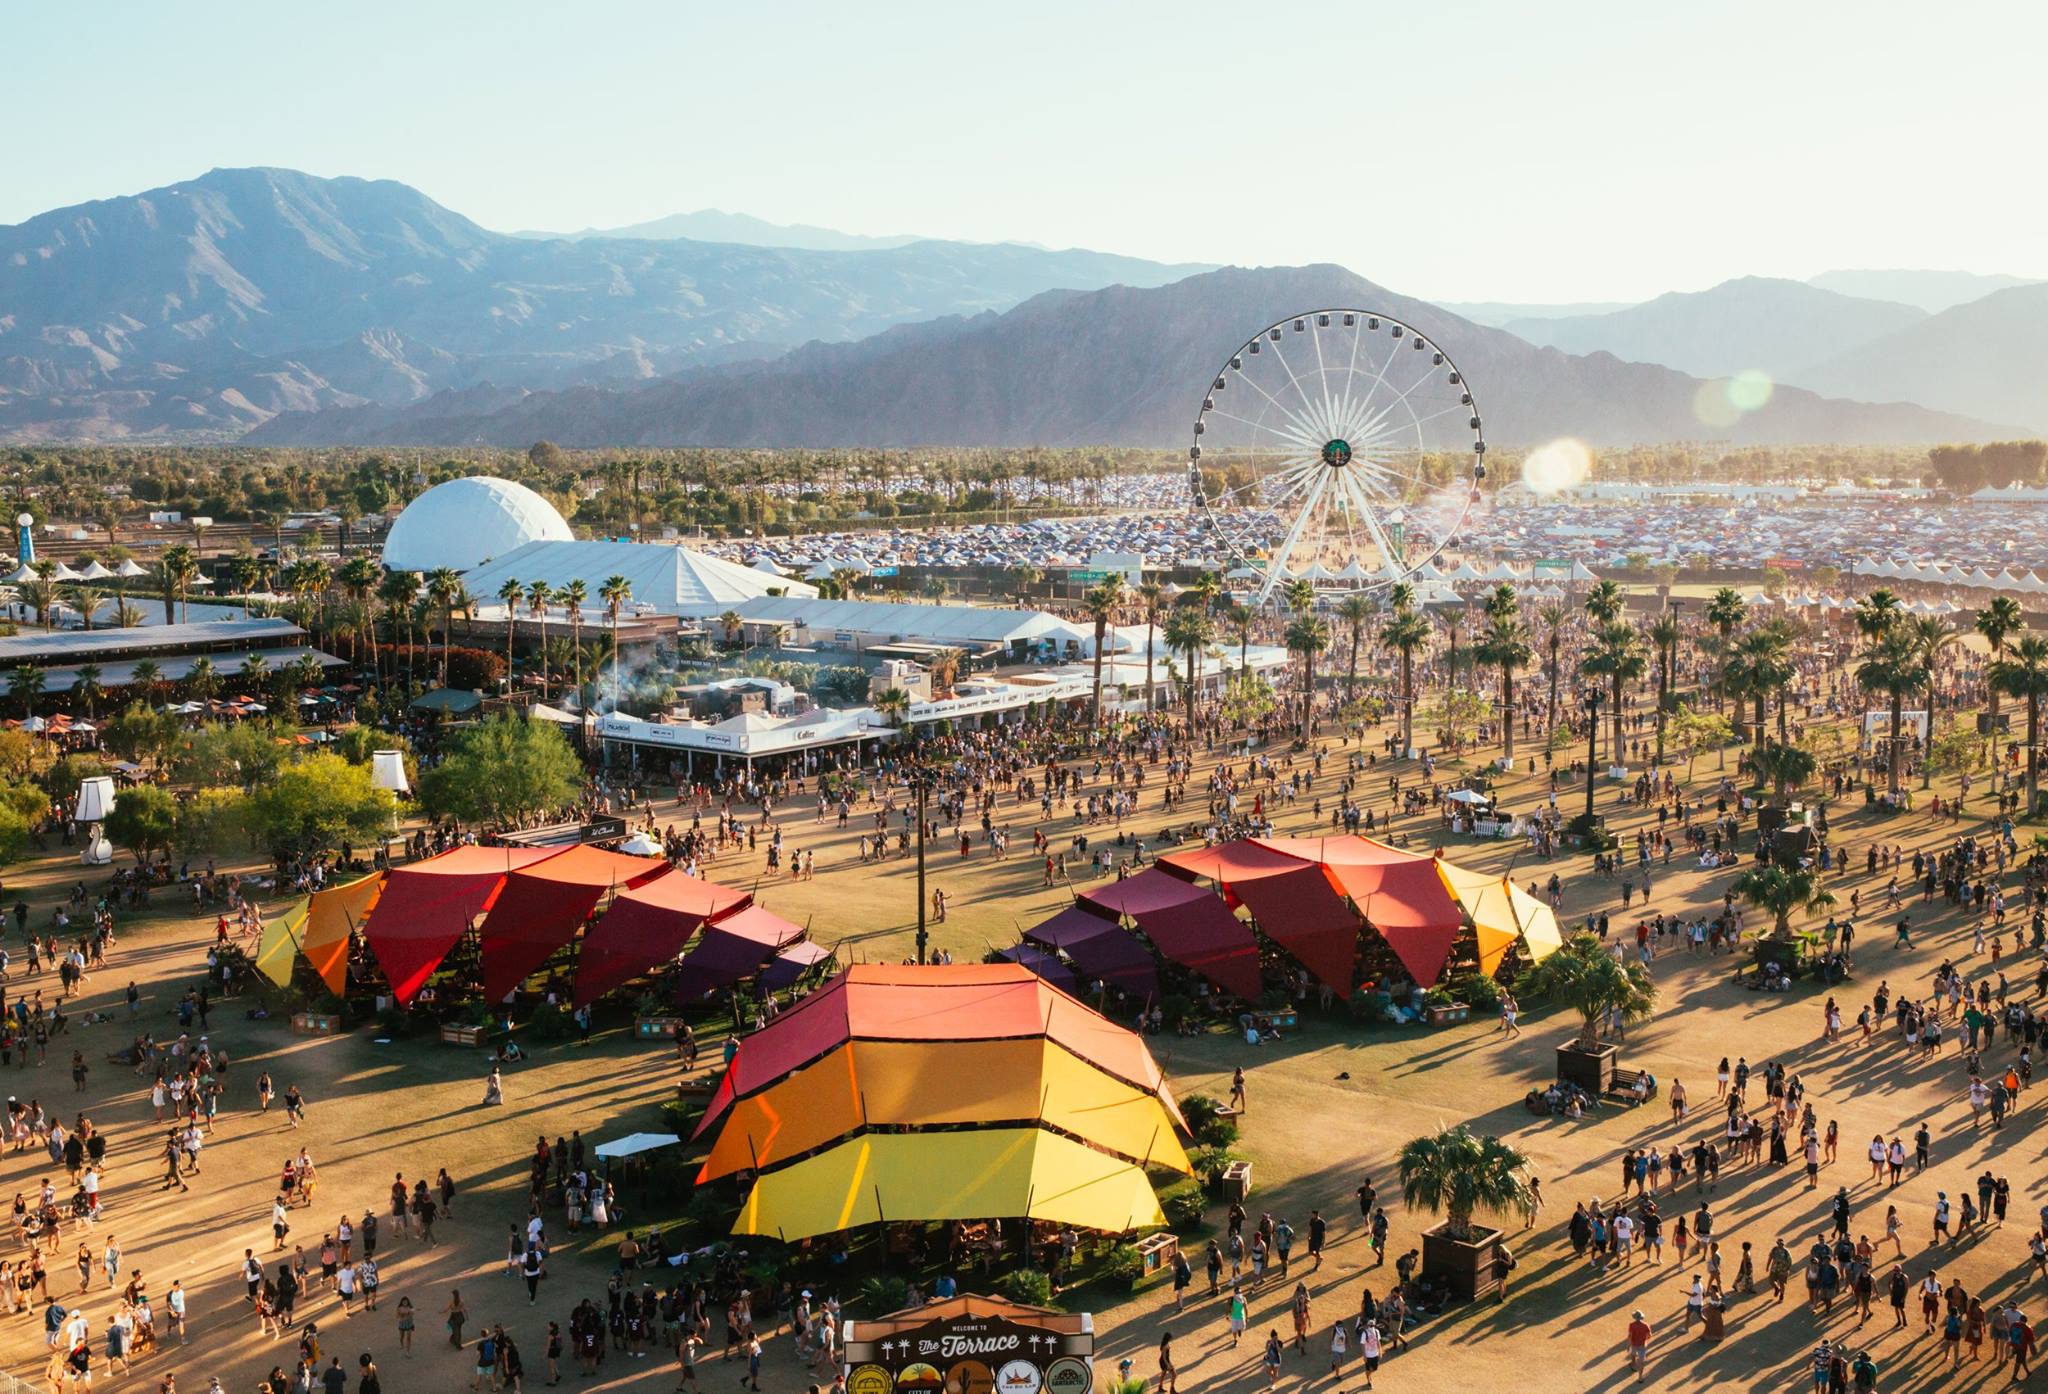 Coachella Valley 10 Things To Do in the Coachella Valley During the